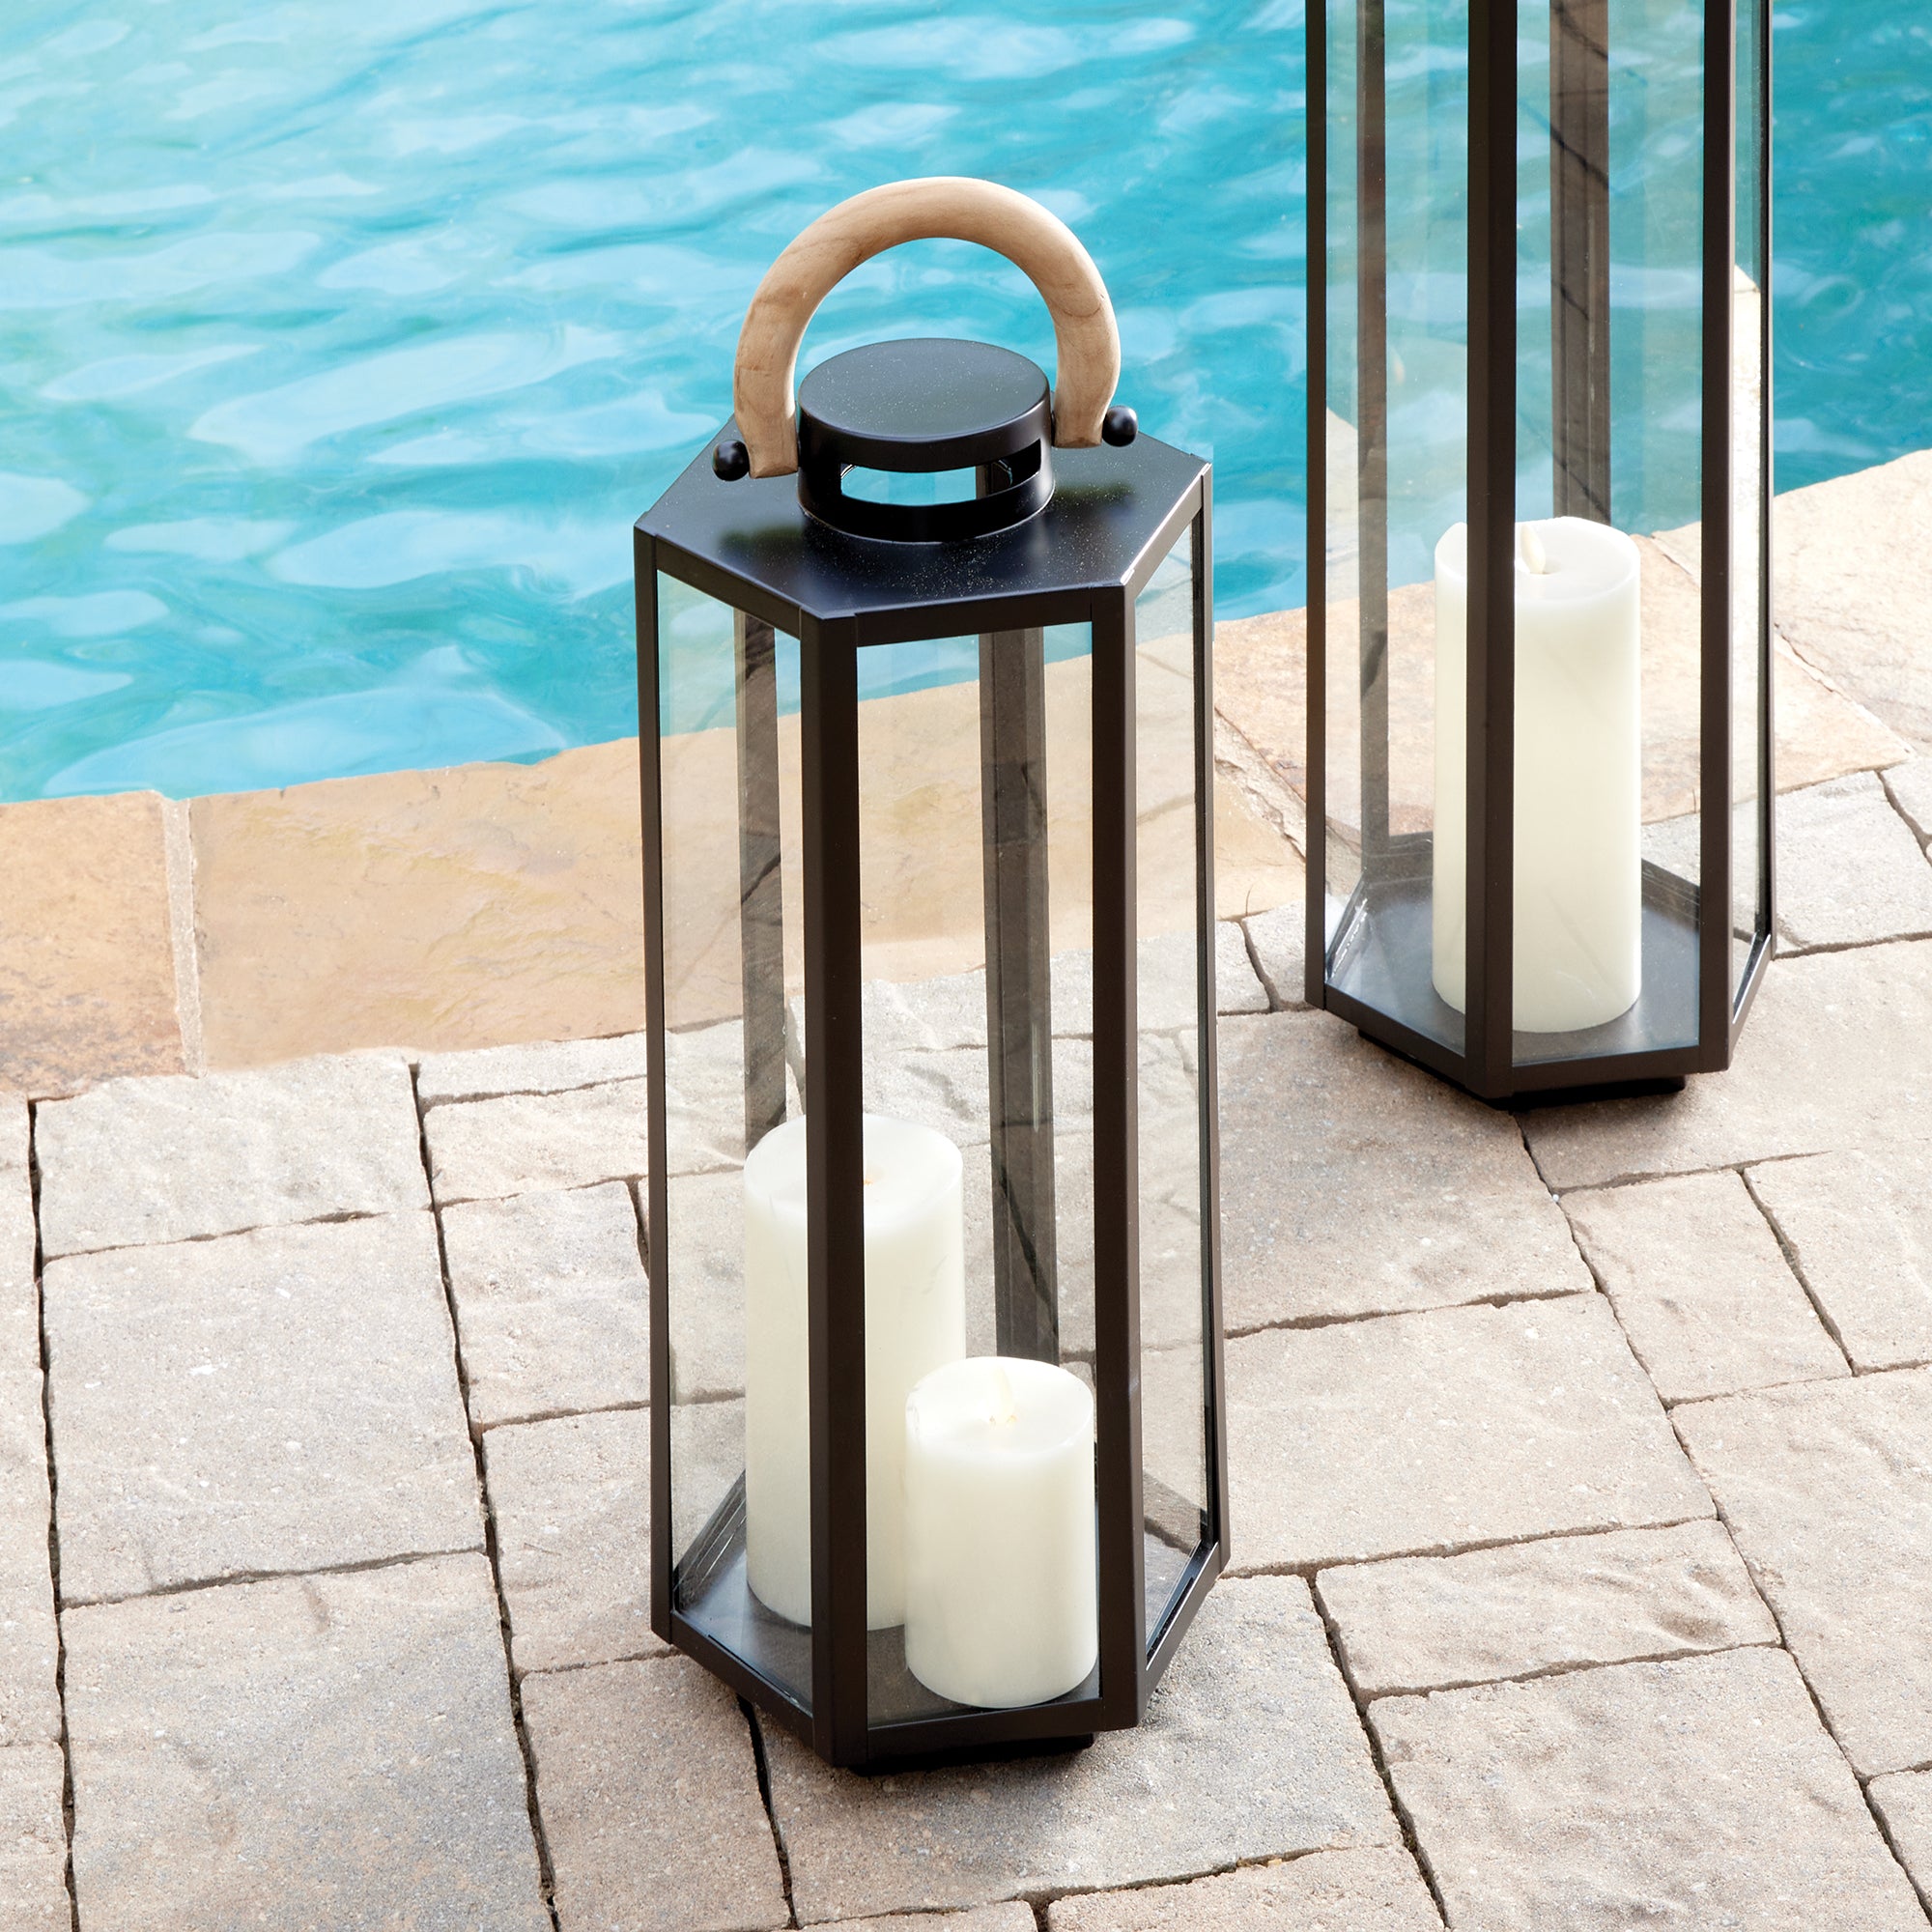 This matte black six panel lantern is made of iron and features a natural teak handle. Impressive in scale, it is a handsome outdoor accent by the pool, or at the front entry. Amethyst Home provides interior design, new construction, custom furniture, and area rugs in the Portland metro area.